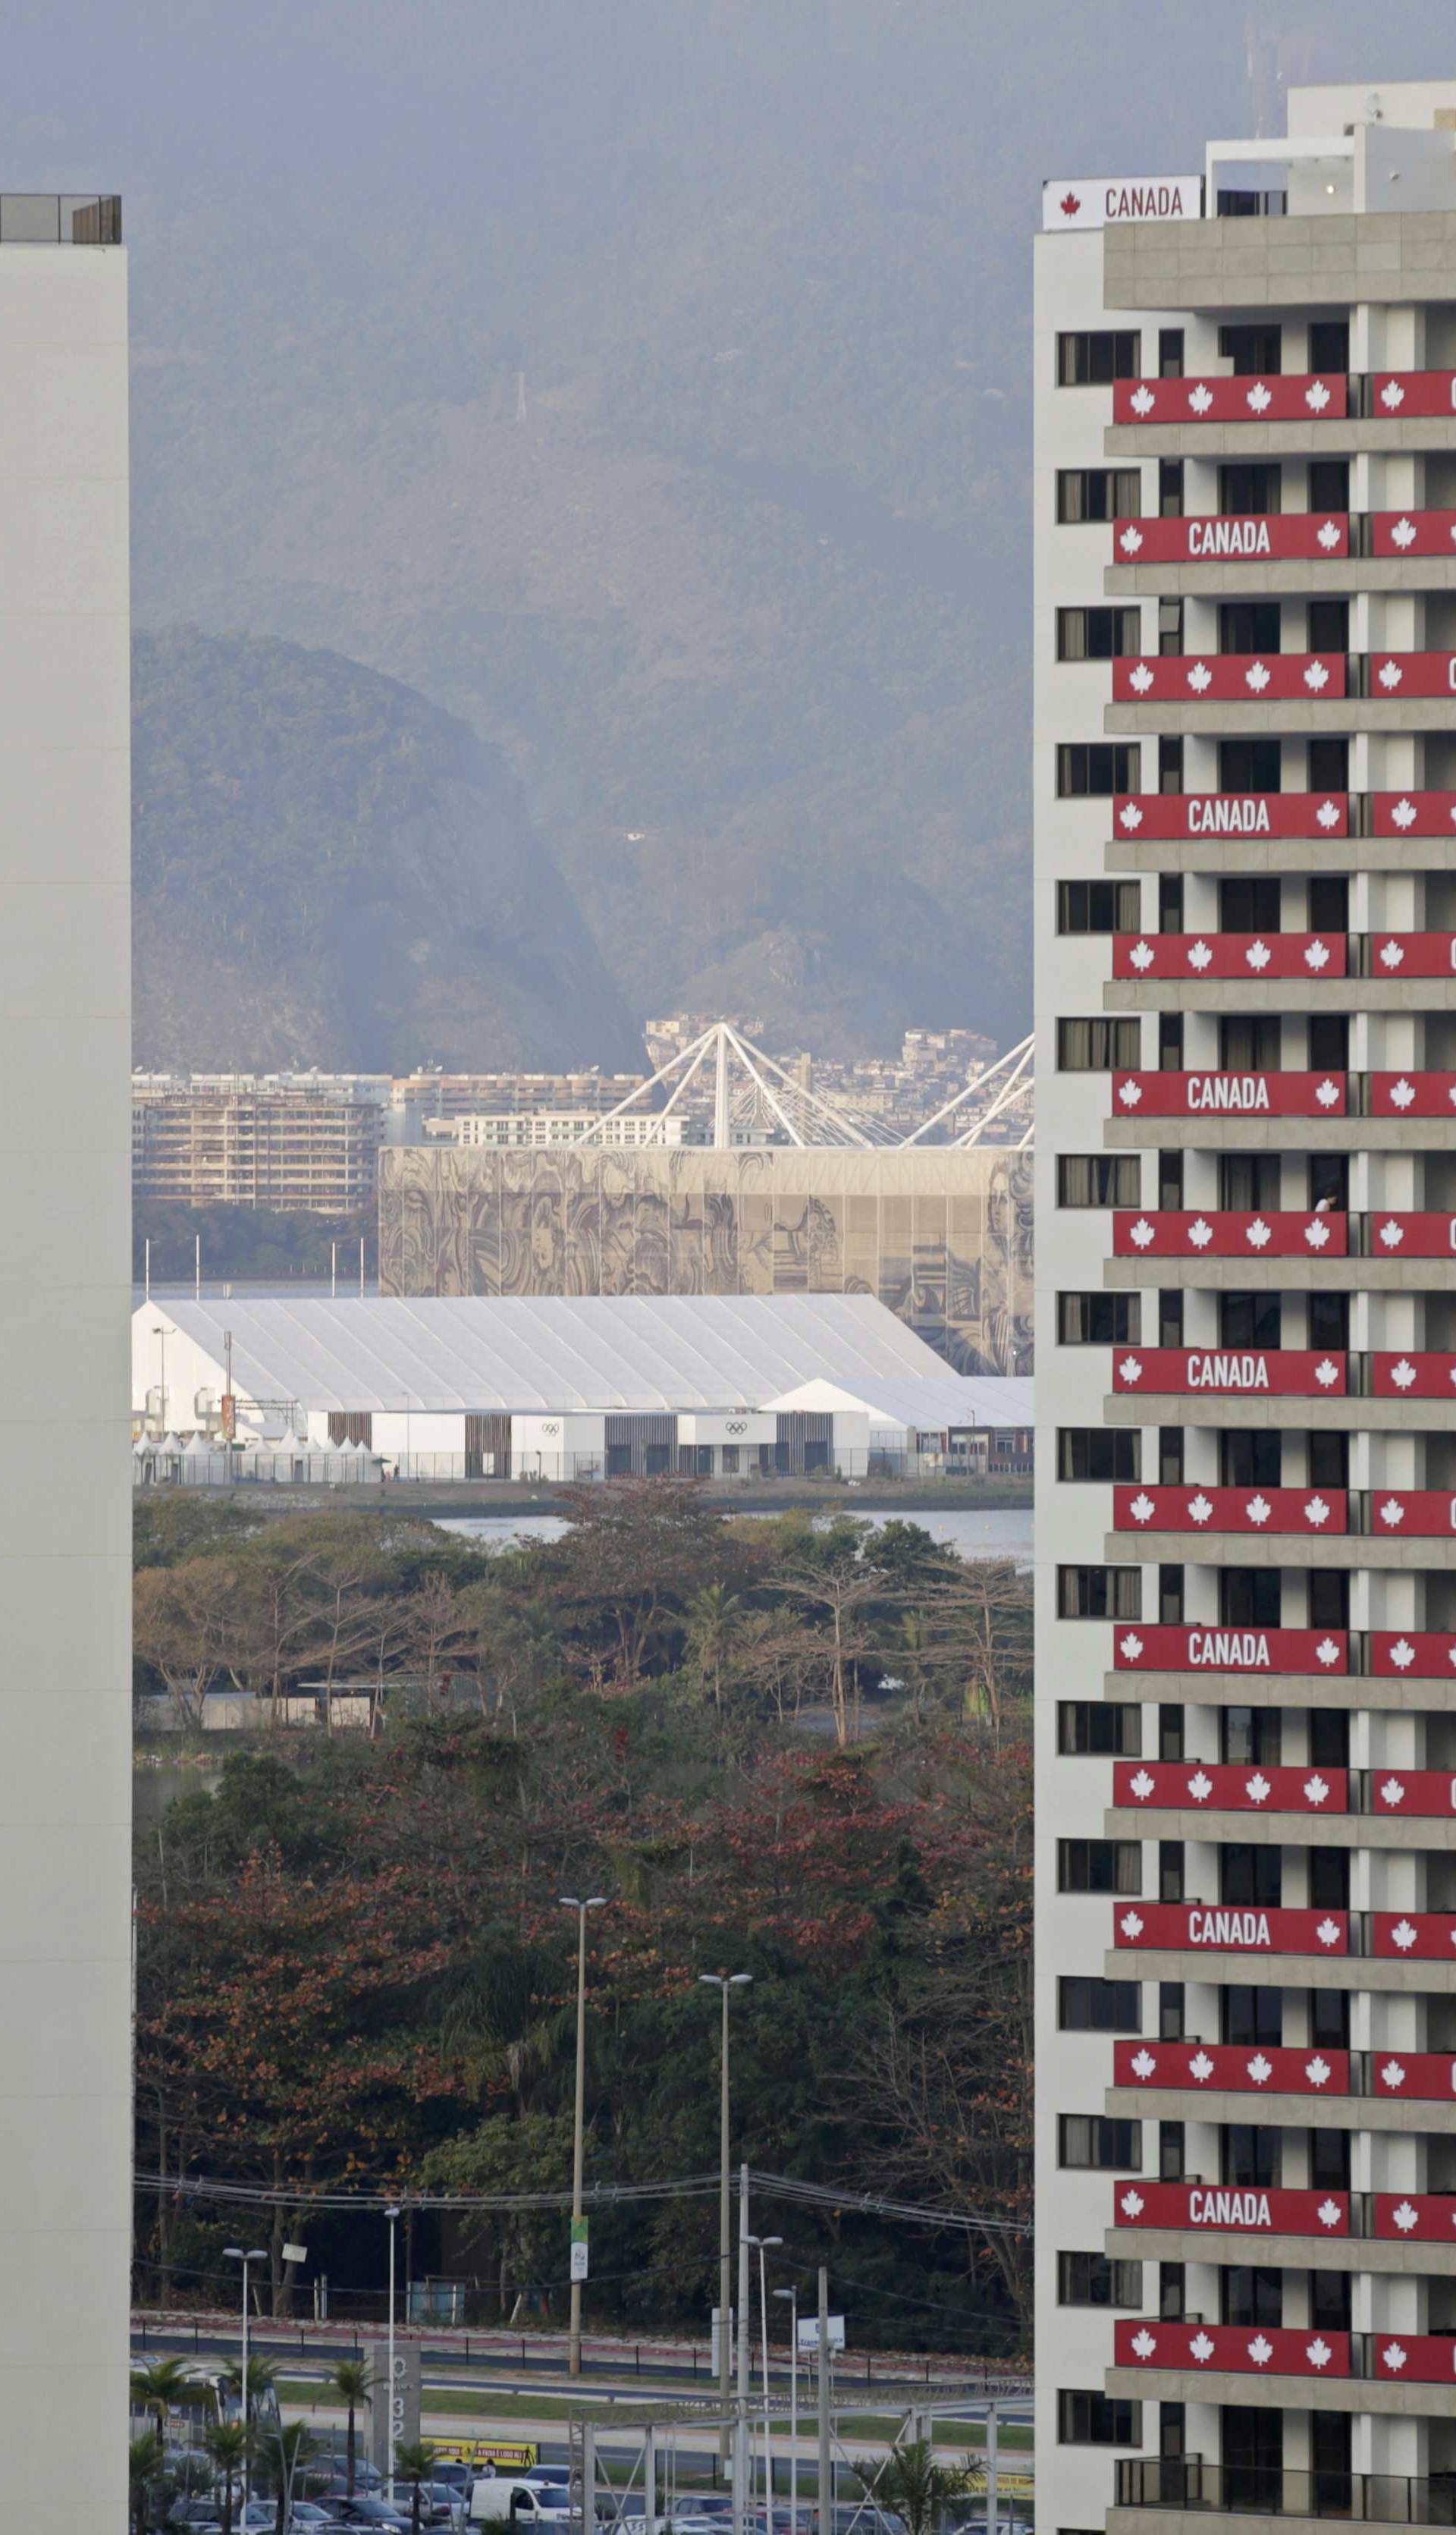 A view of one of the blocks of apartments where Canada's athletes are supposed to stay in Rio de Janeiro